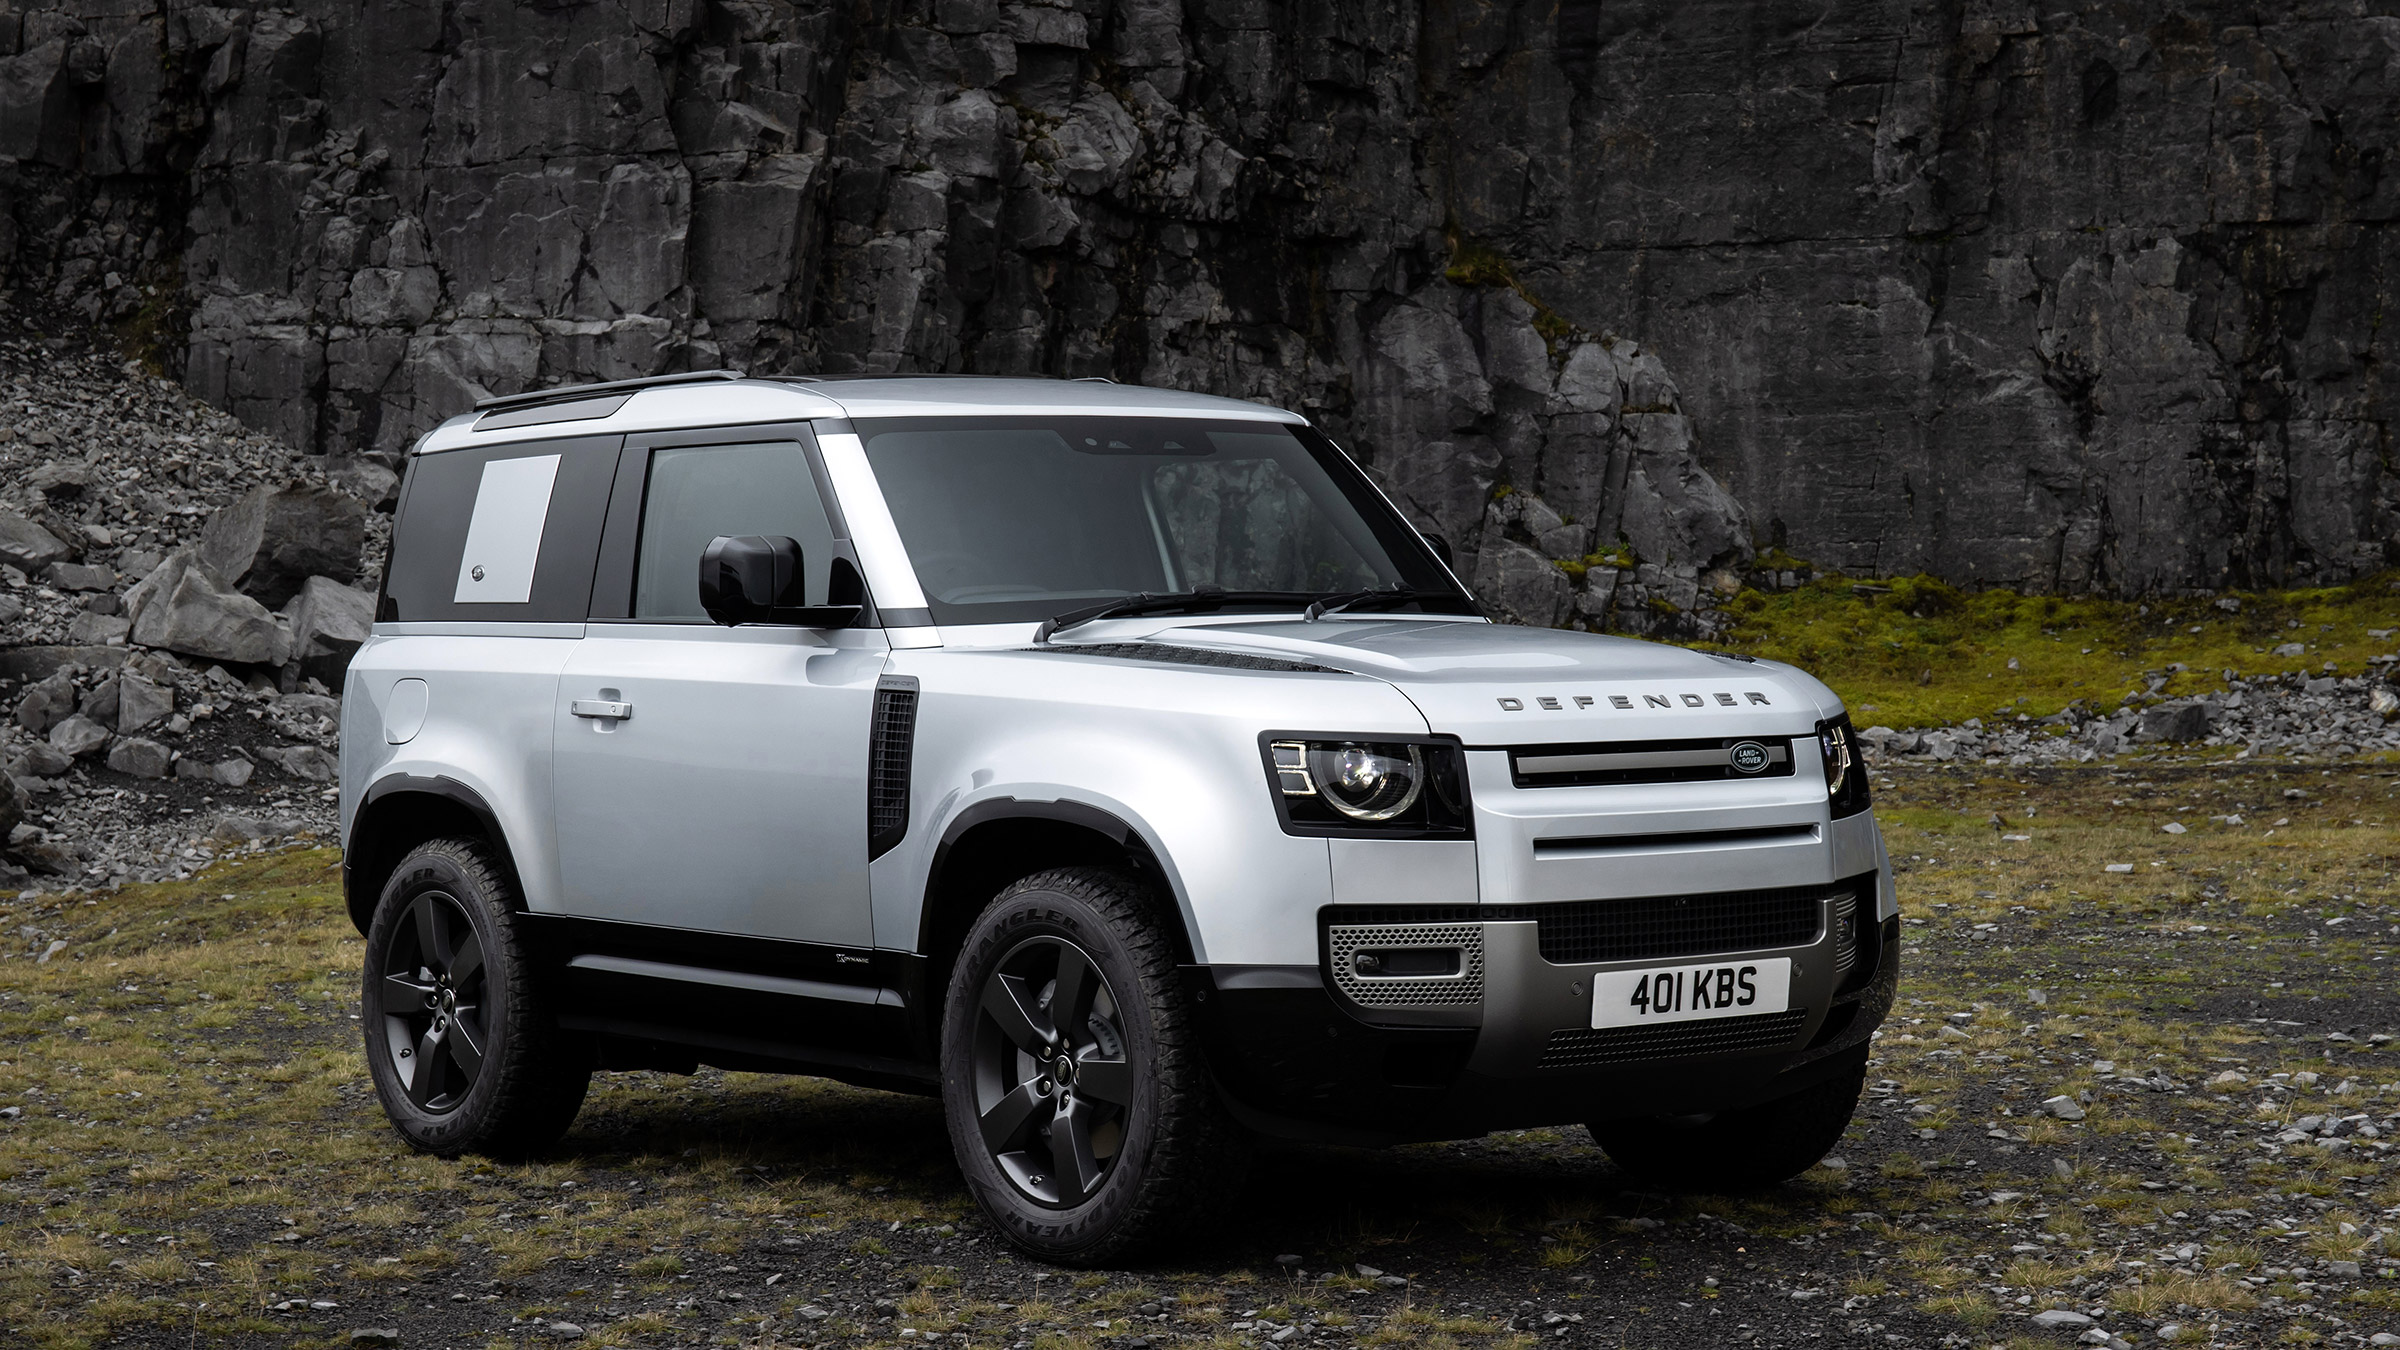 2021 Land Rover Defender upgrades – new six-cylinder diesels to